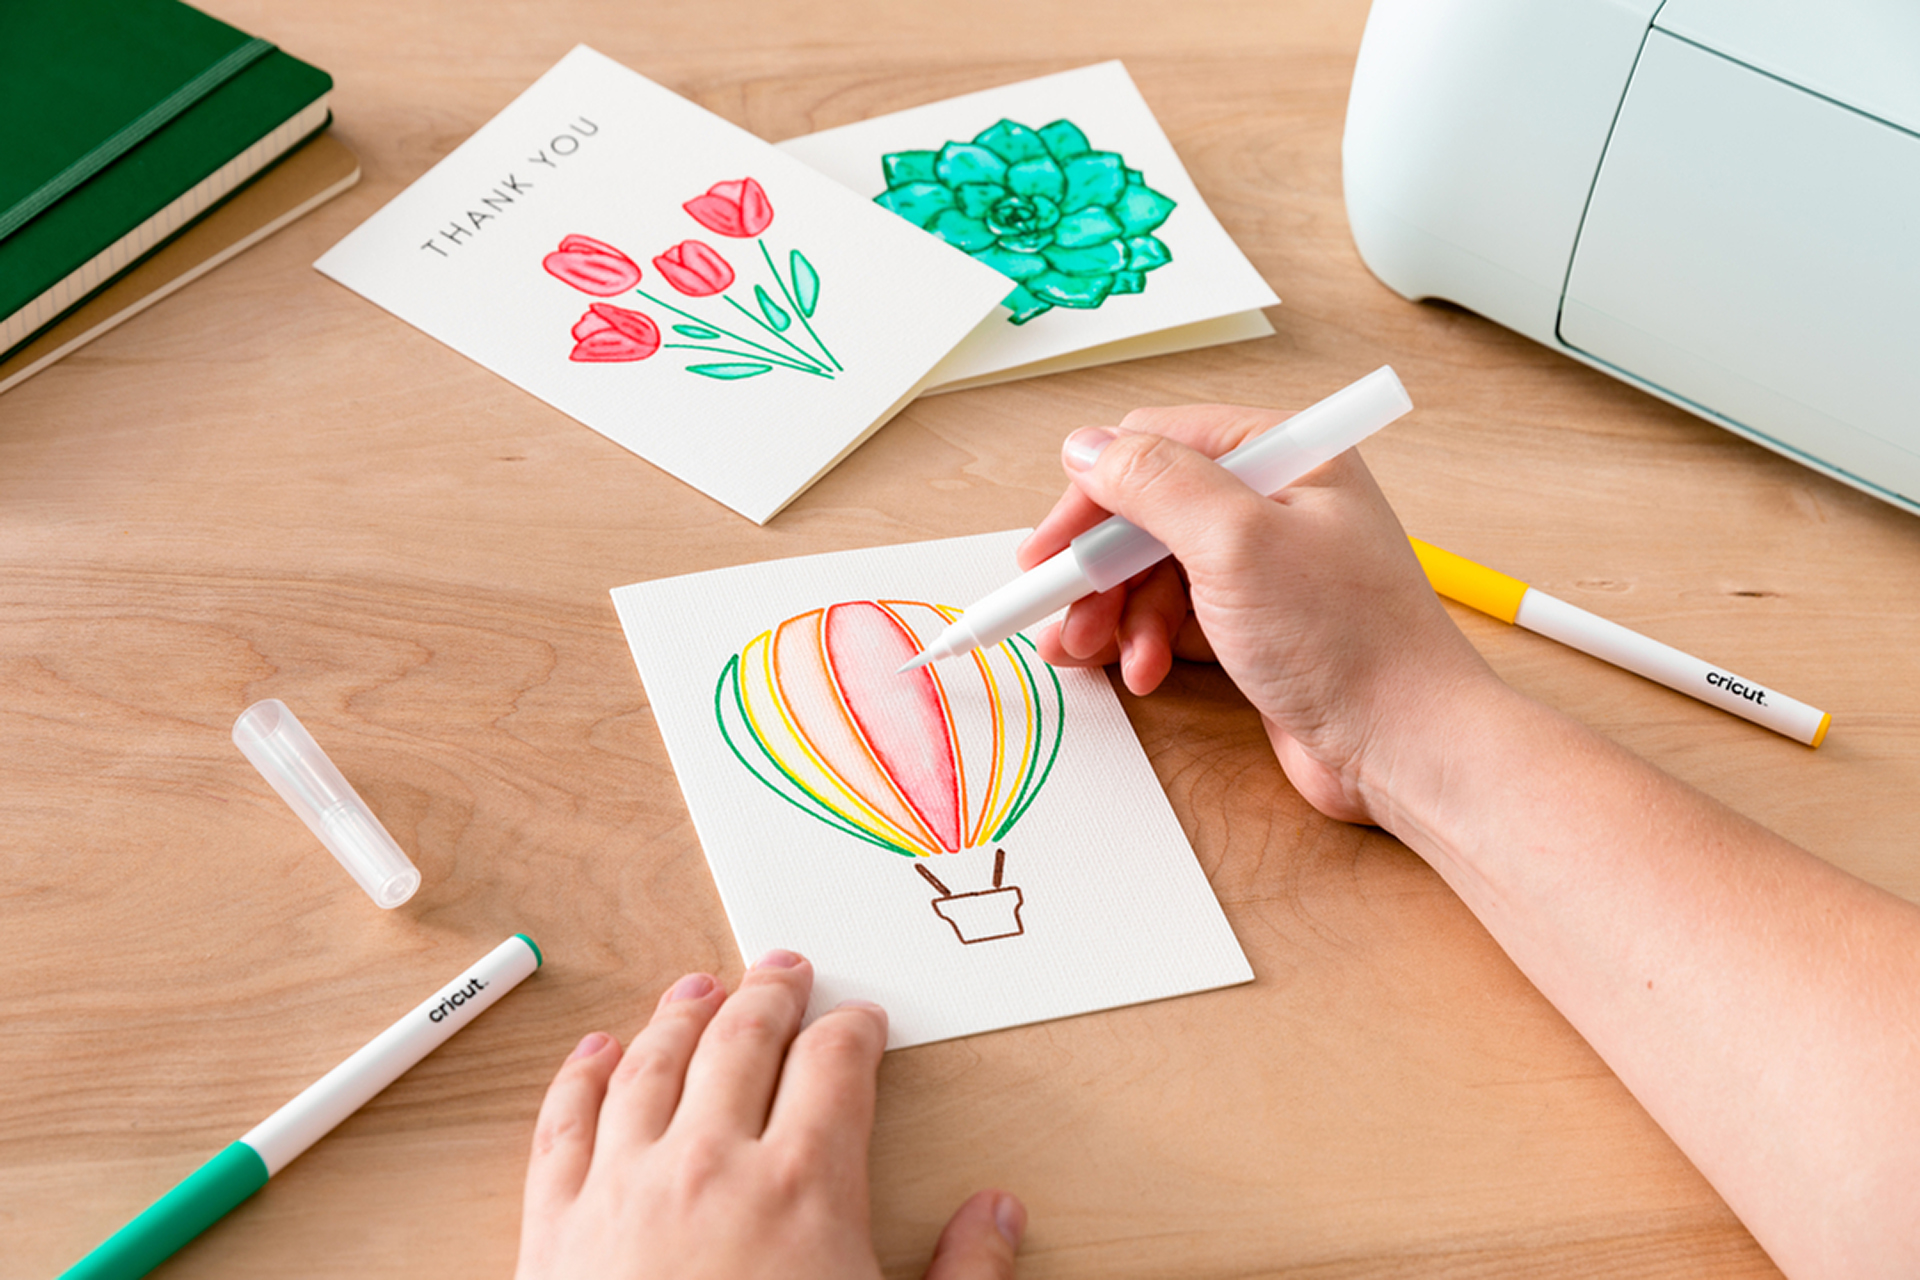 9 new Cricut materials and tools to make with starting Fall 2022